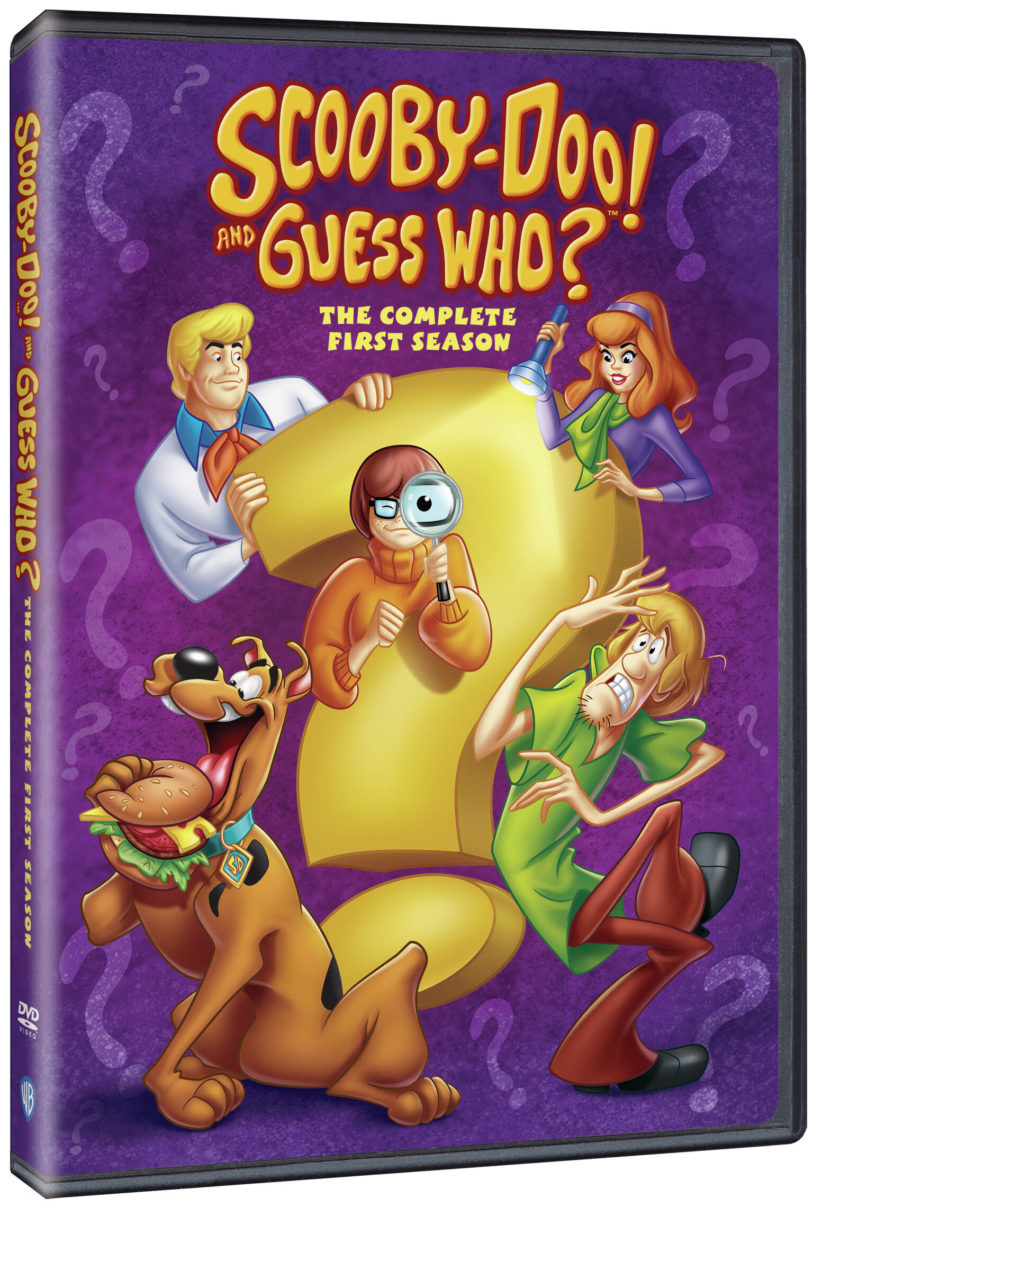 Scooby-Doo! And Guess Who?: The Complete First Season DVD cover (Warner Bros. Home Entertainment)